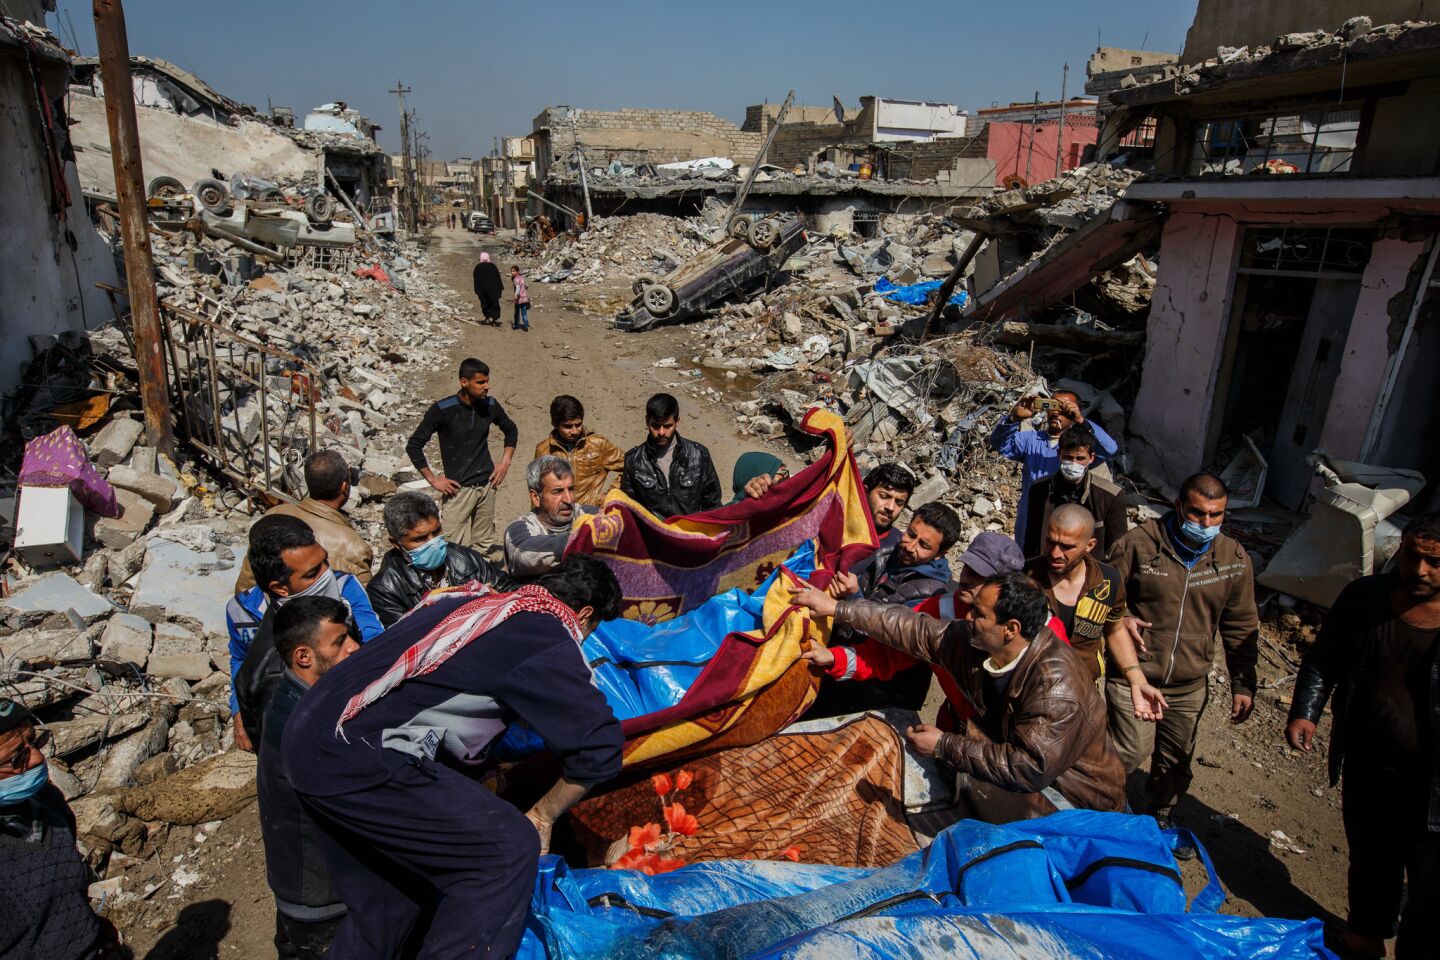 Residents pile body bags in the back of a truck after airstrikes in Mosul left scores dead.